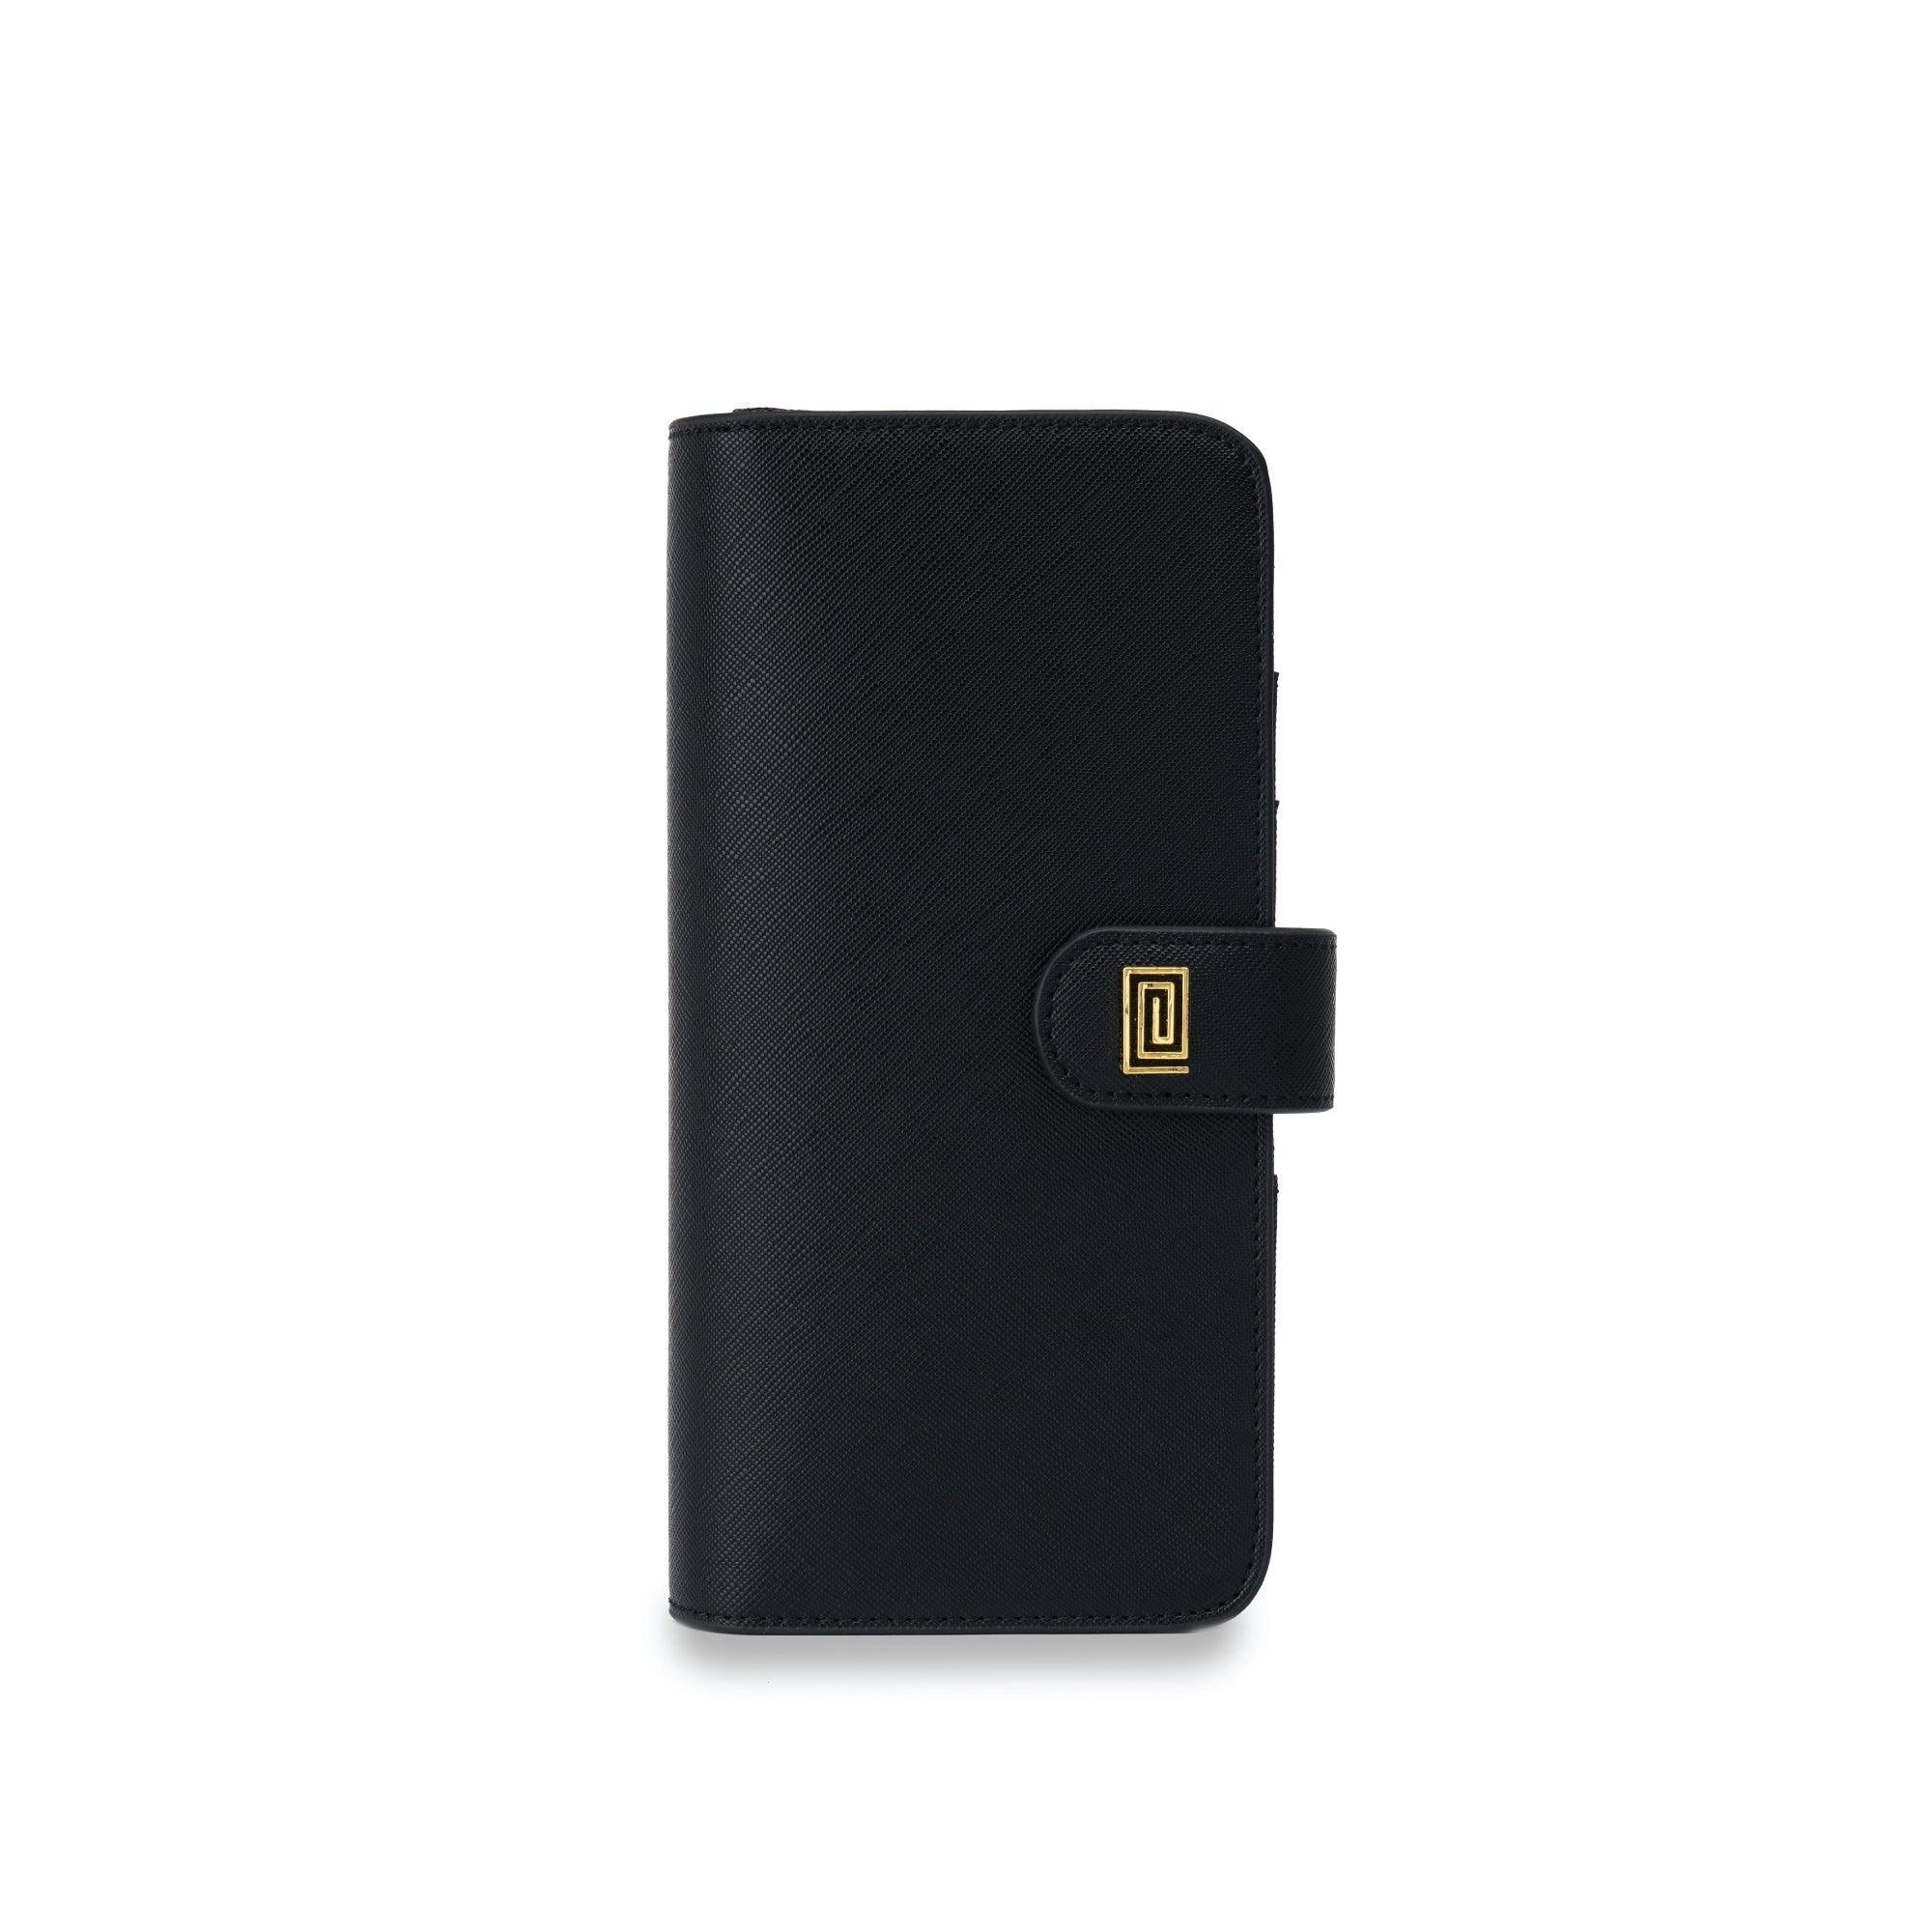 Gold on Jet Black Saffiano Slim Compact | OUTLET | SL5. Slim Compact Wallet Ringless Agenda | Wallet Planner Cover | Final Sale | NOTIQ